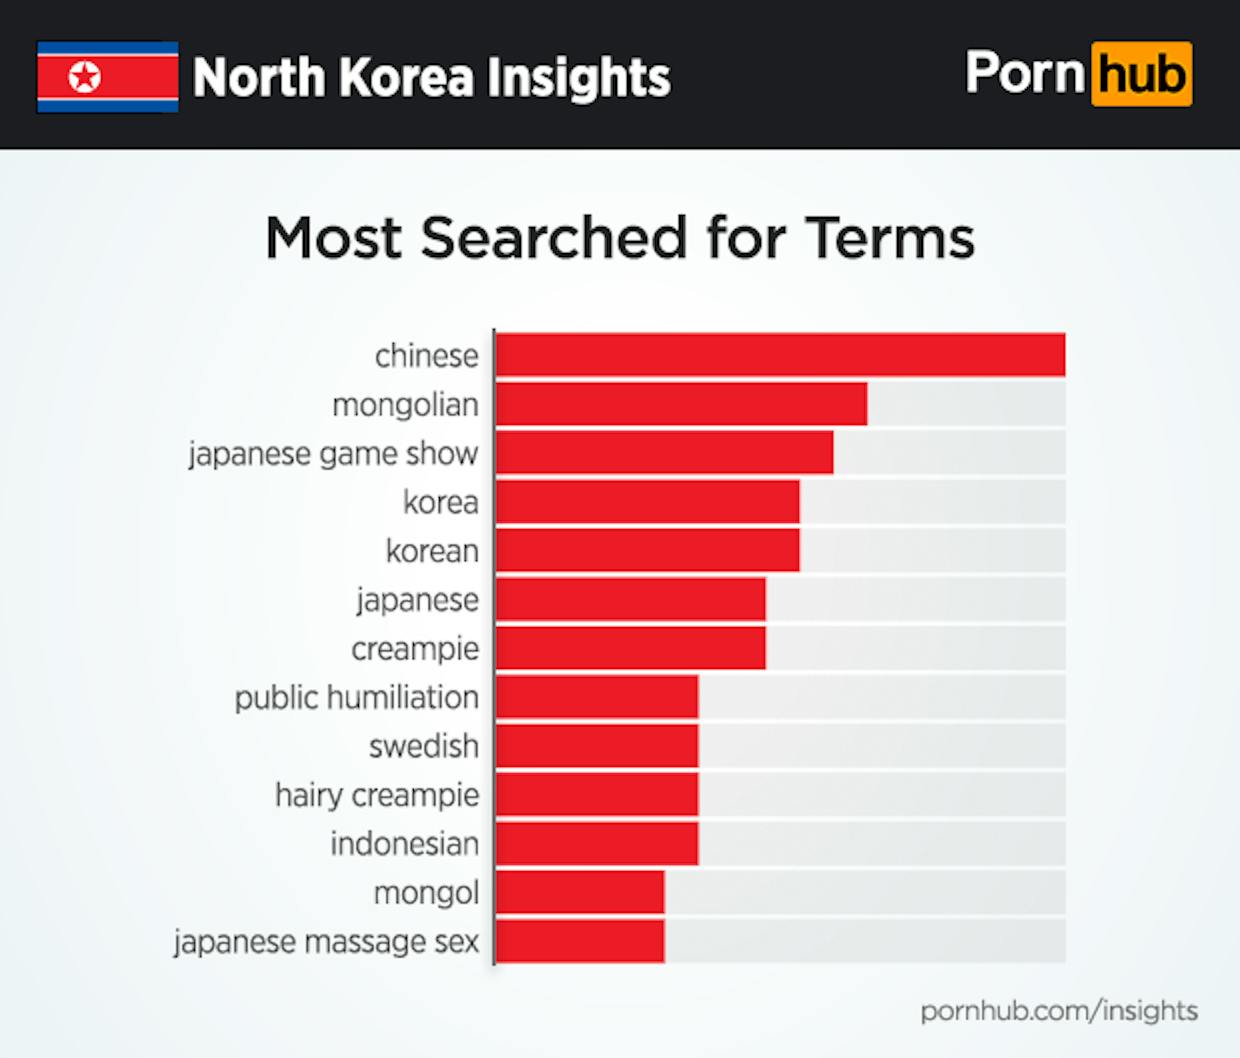 Real North Korean Porn - Pornhub Just Released New Data on What North Koreans Watch ...